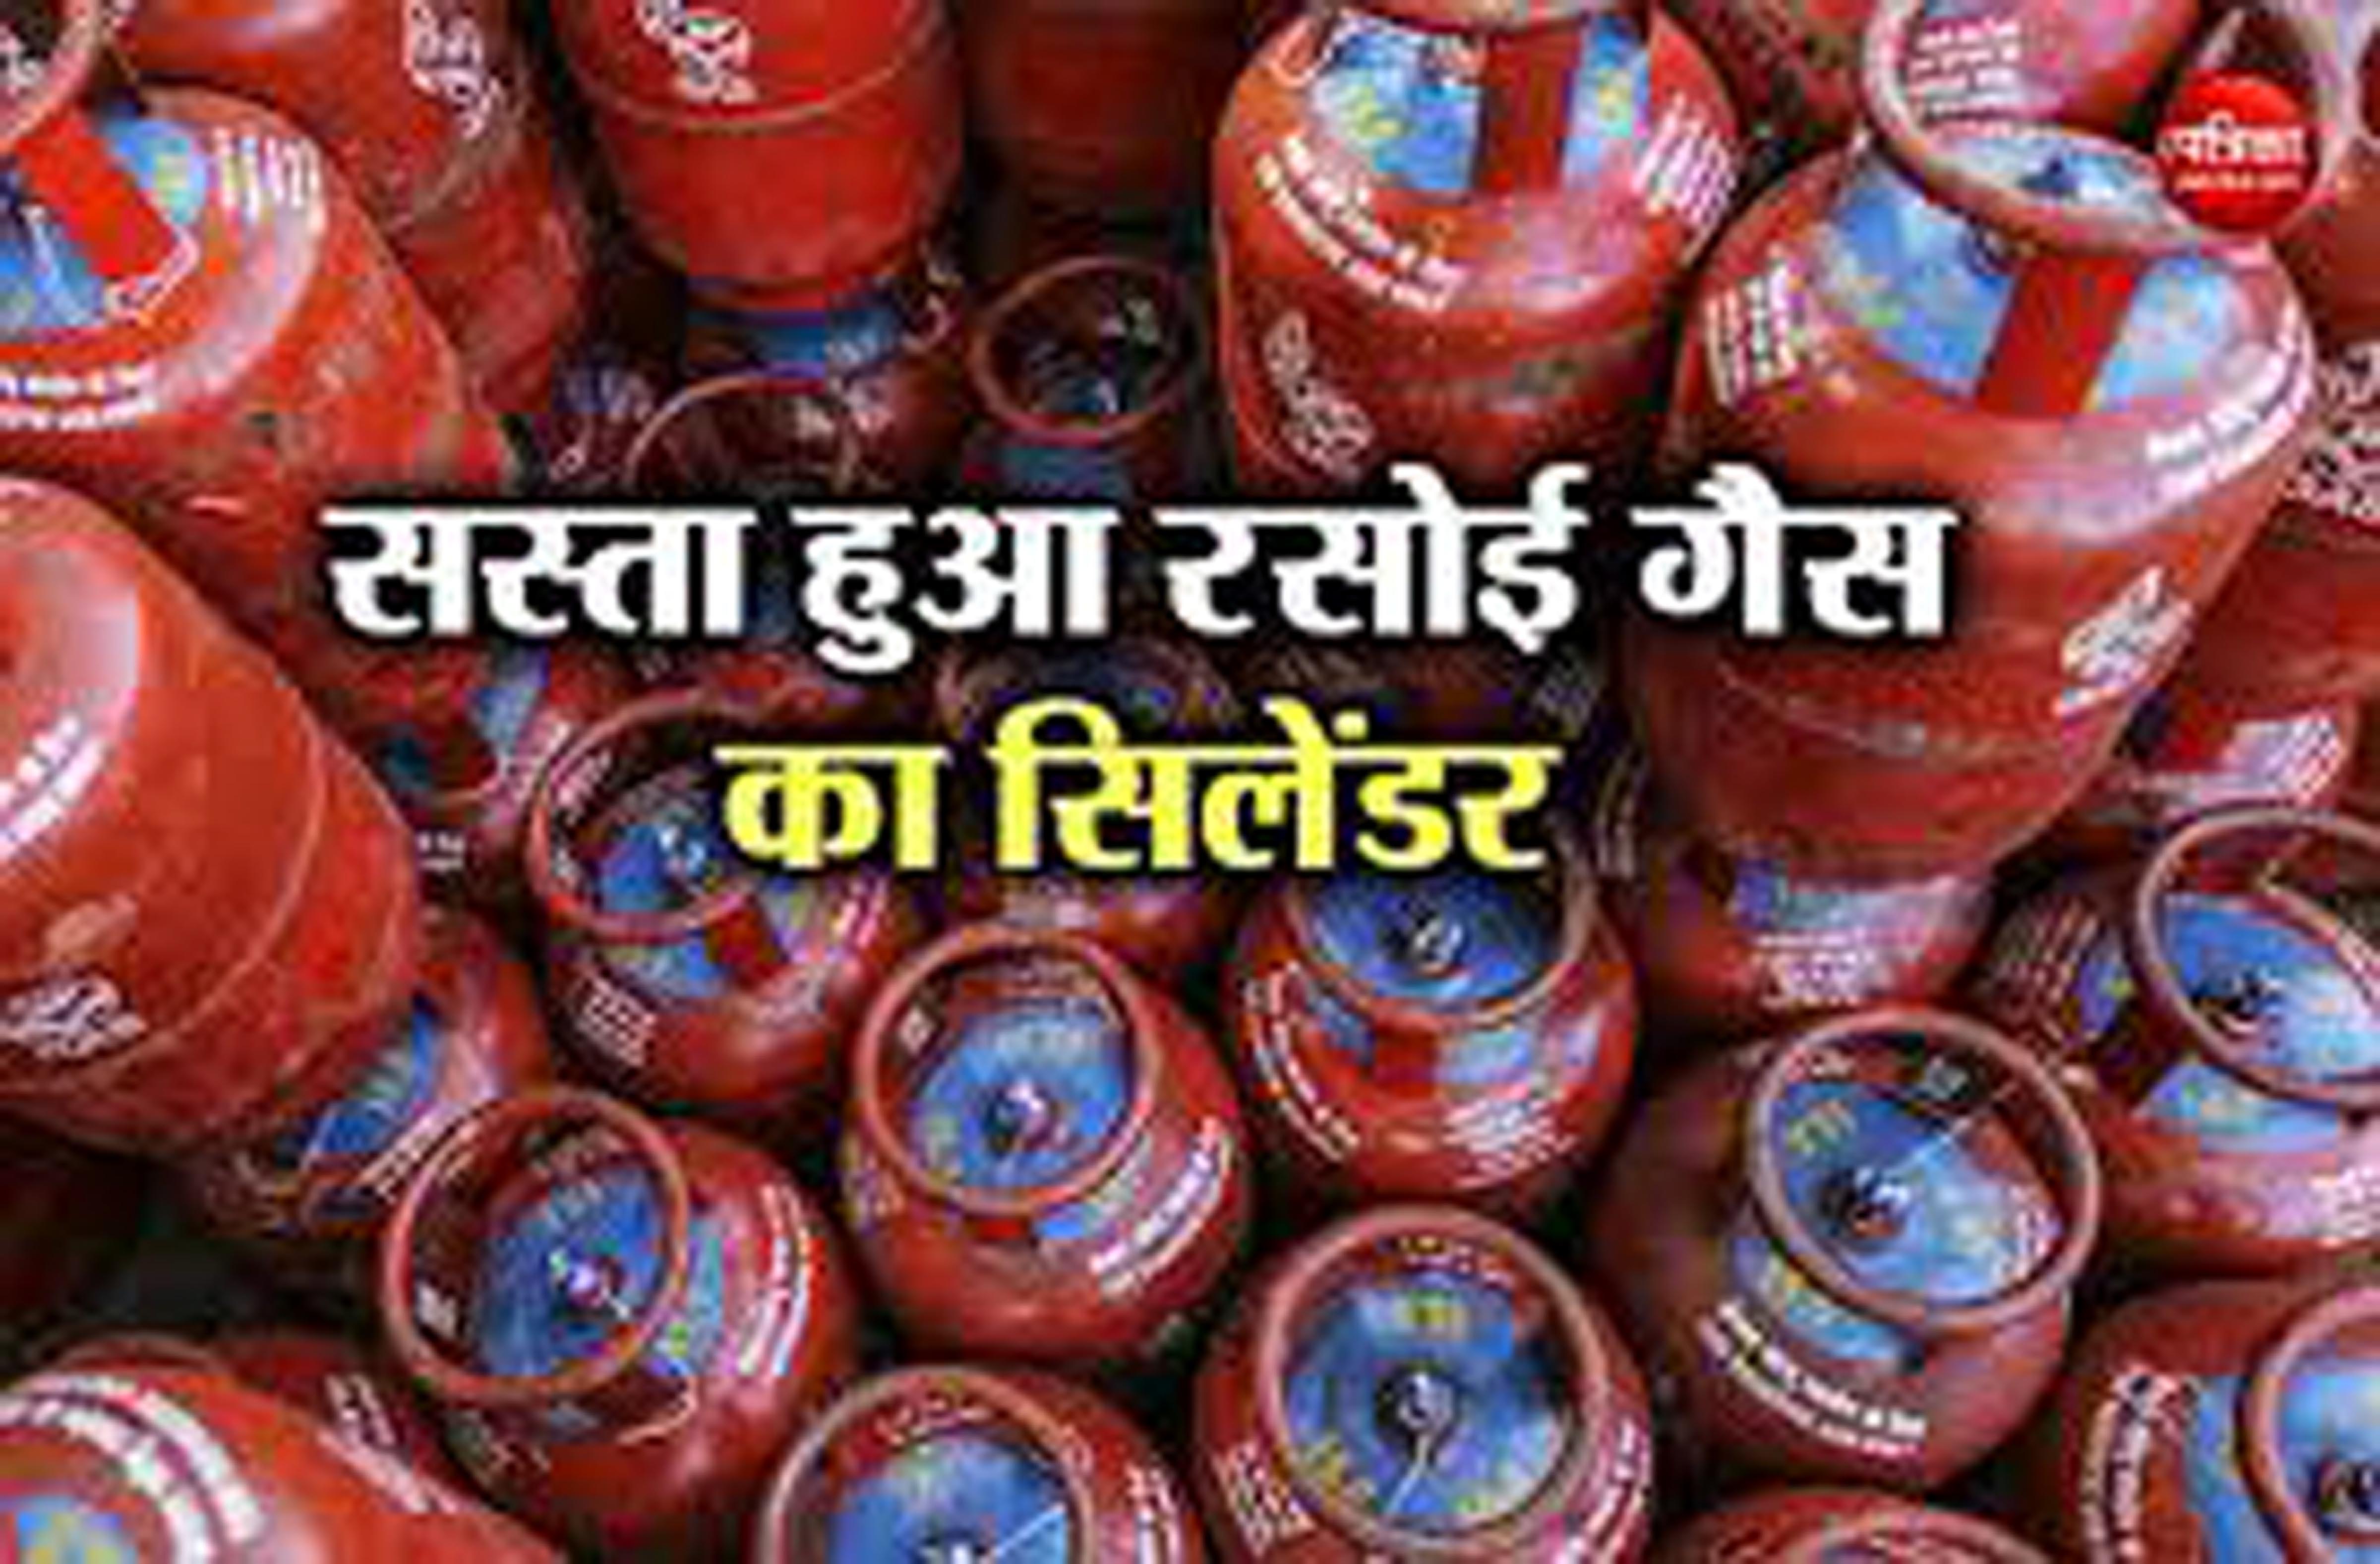 Lpg cylinder cheaper, new price of lpg cylinder